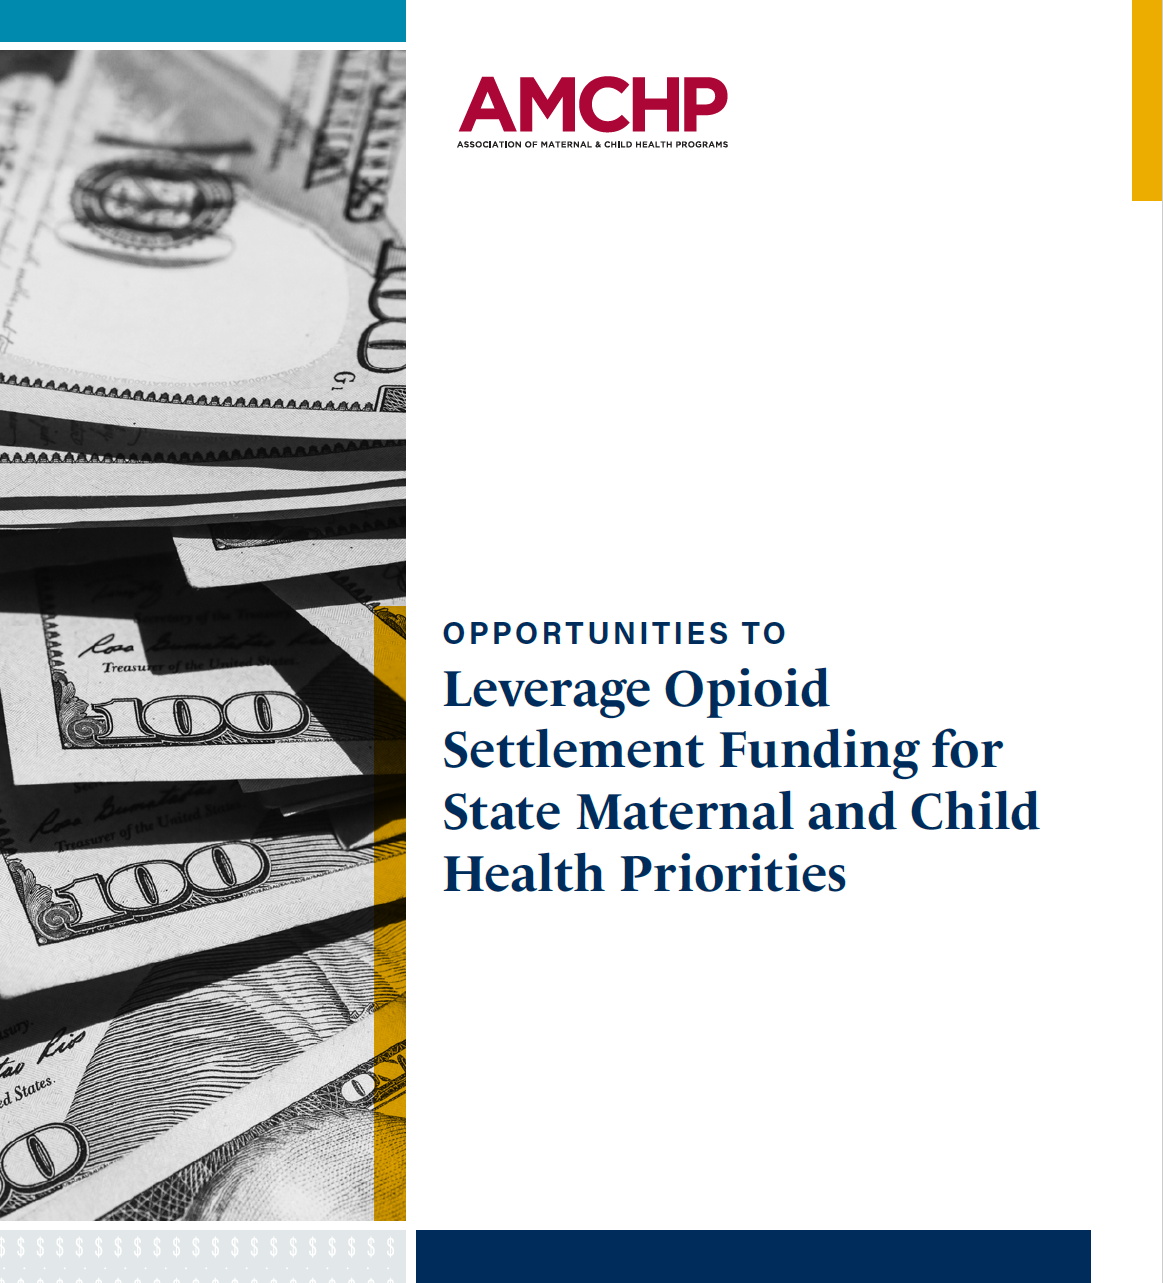 Opportunities to Leverage Opioid Settlement Funding for State Maternal and Child Health Priorities